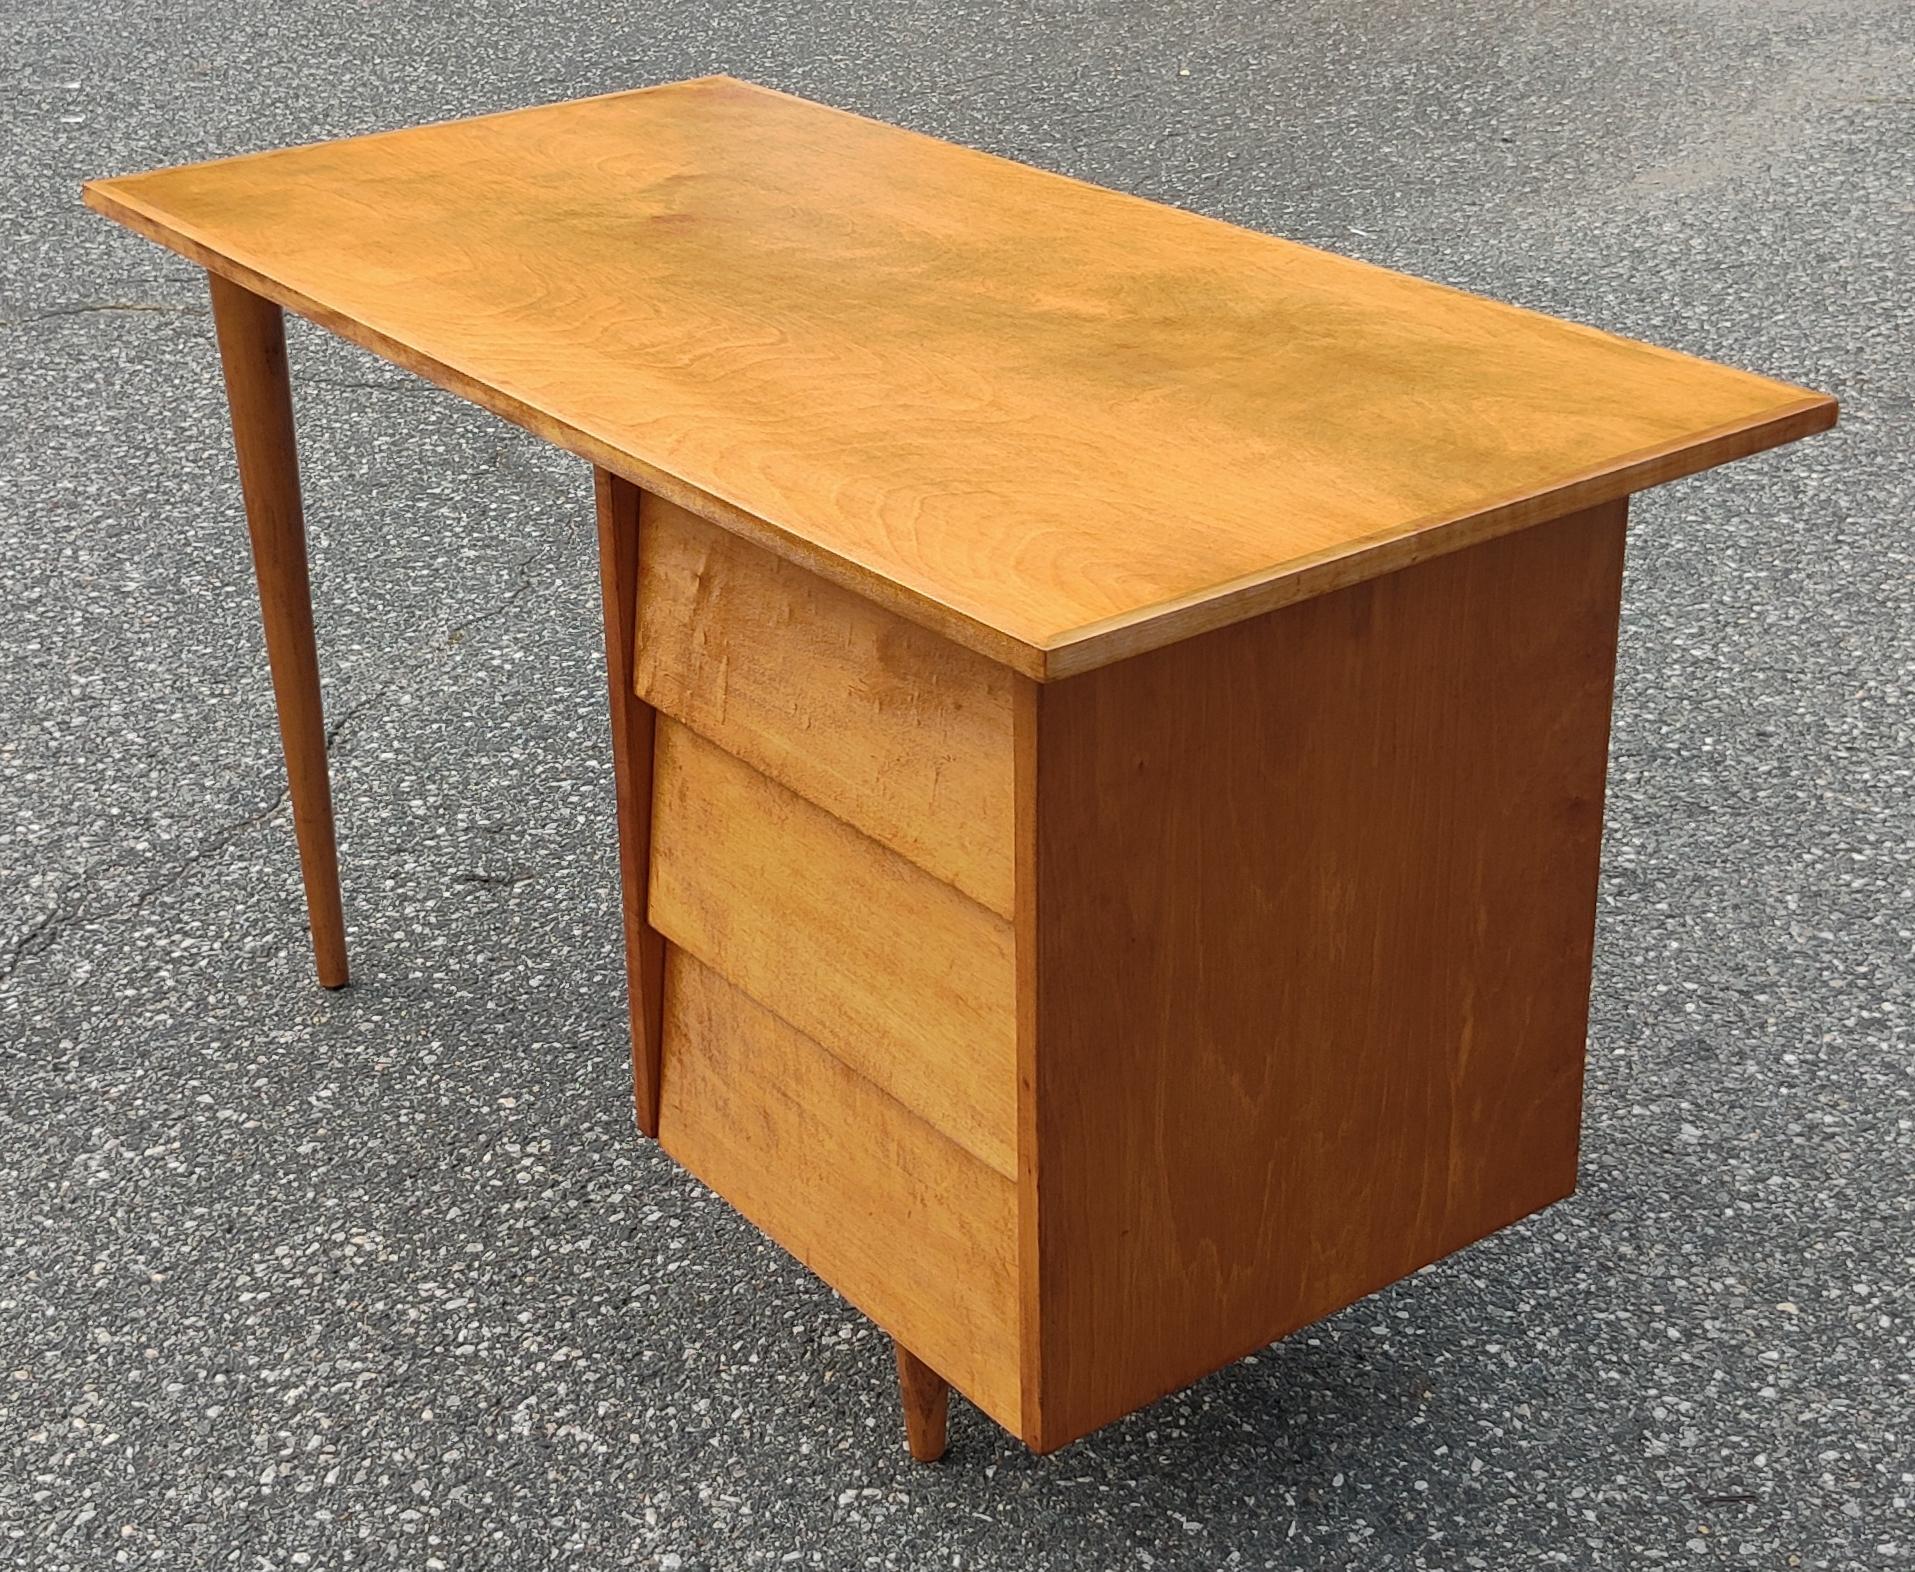 American Restored Rare Early Florence Knoll Model 17 Louvered Maple Desk Signed Madison For Sale